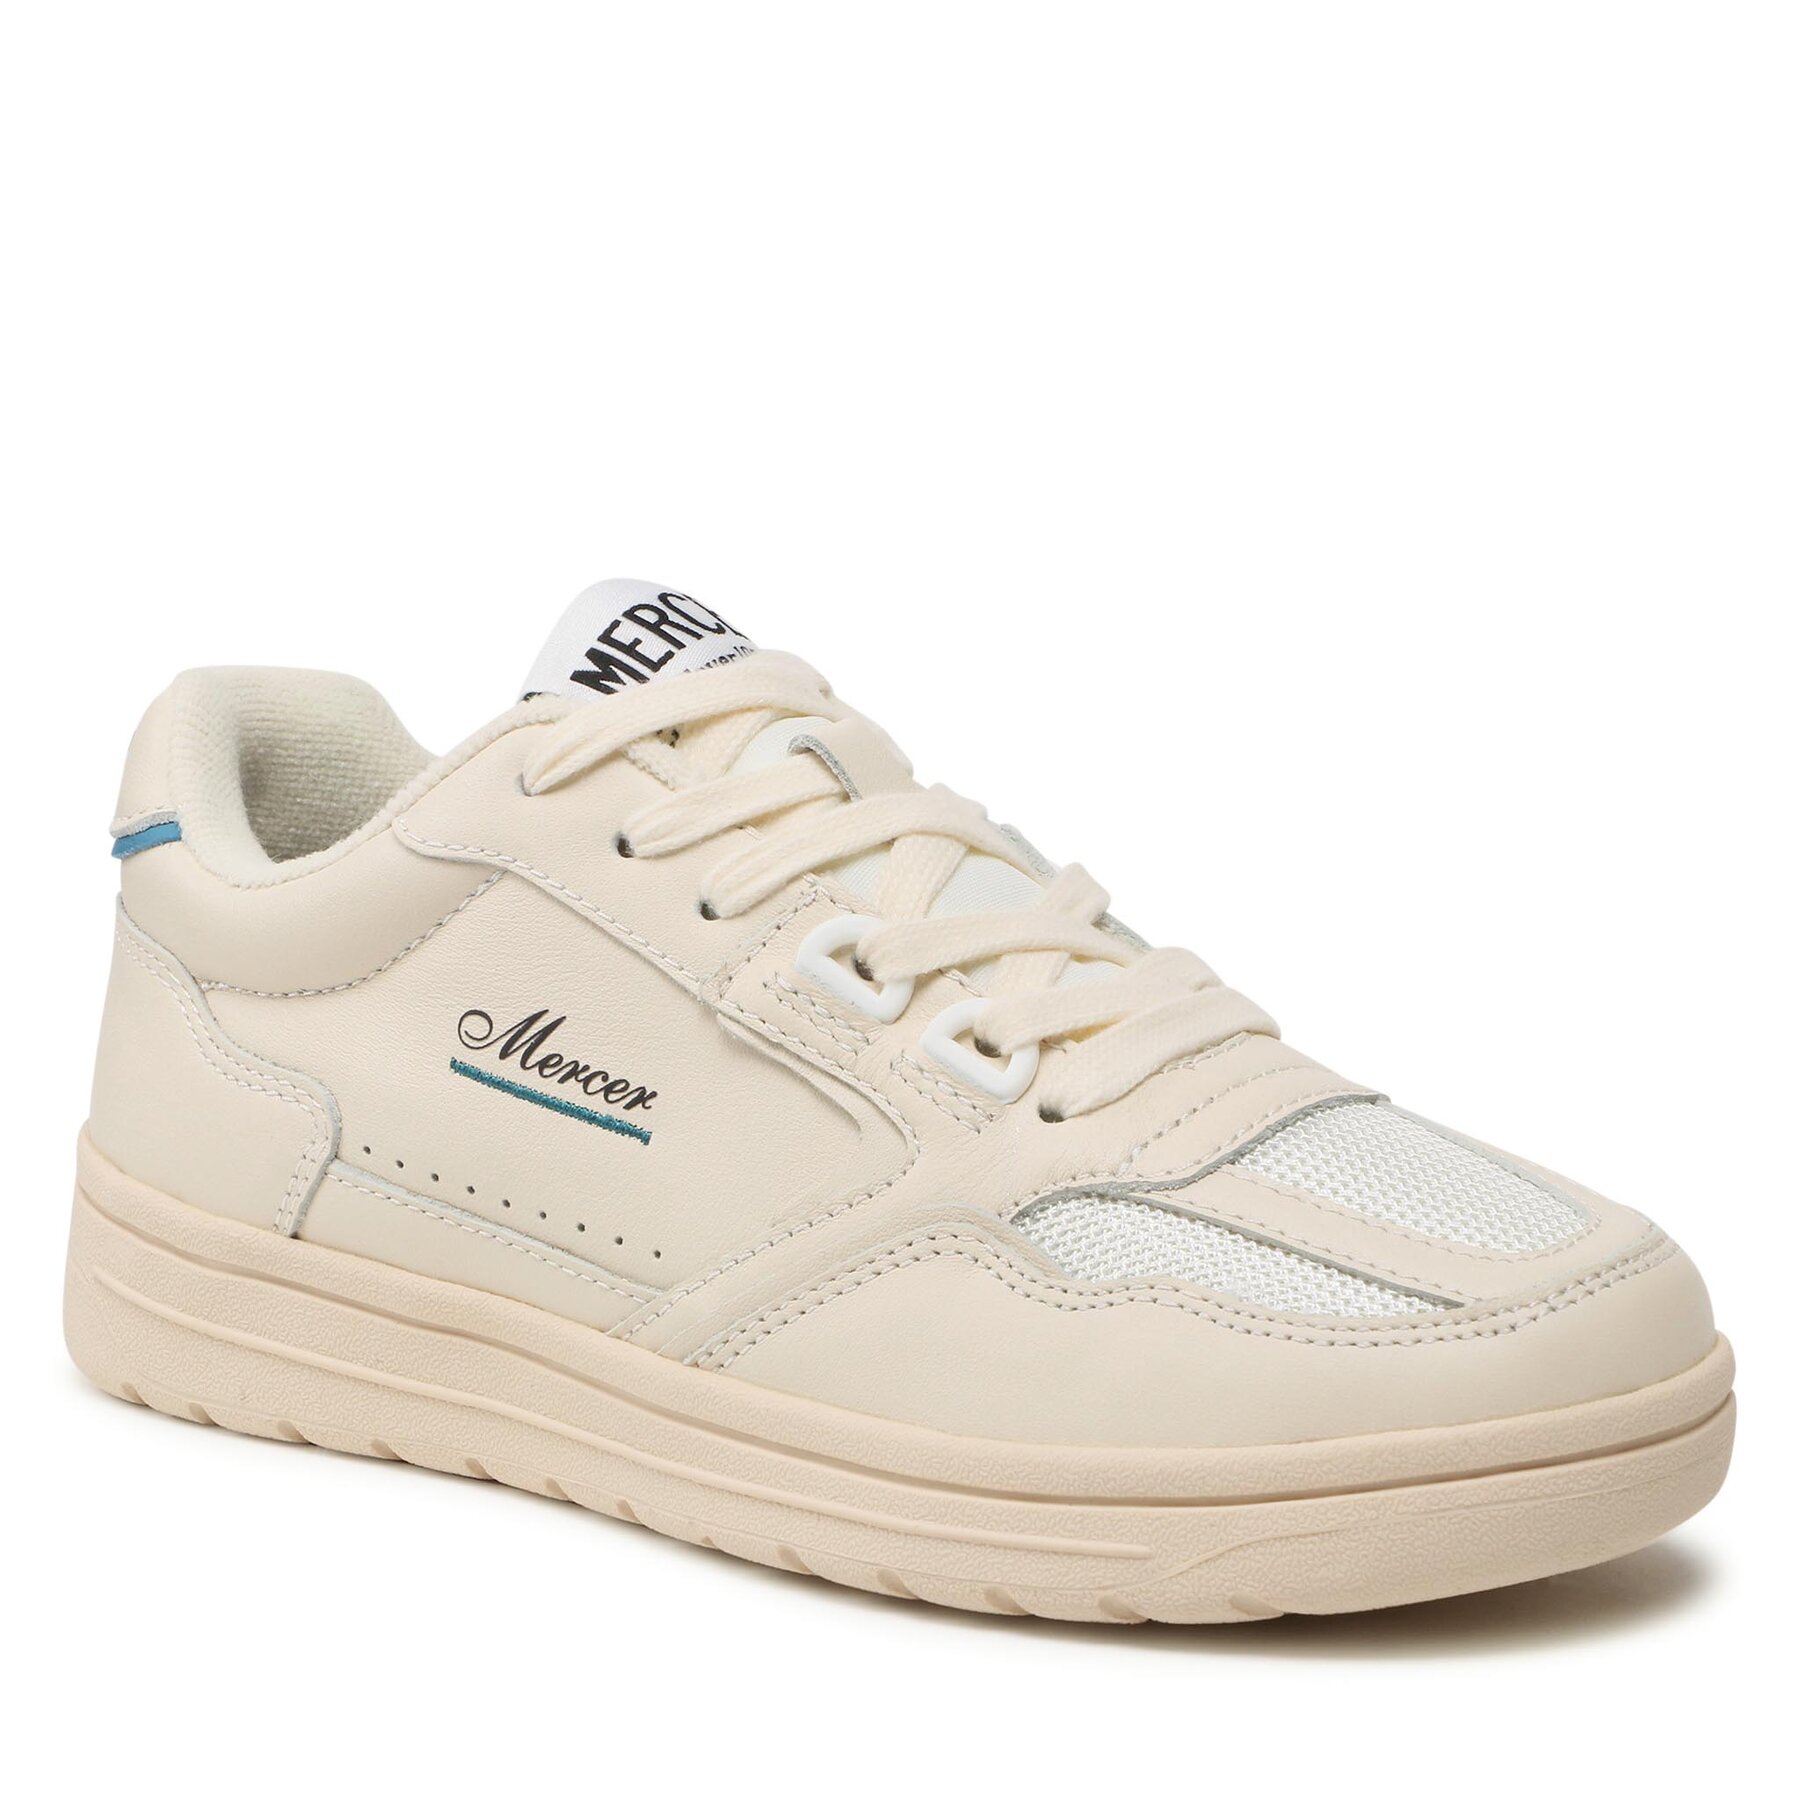 Sneakers Mercer Amsterdam The Player ME231008 Off White 102